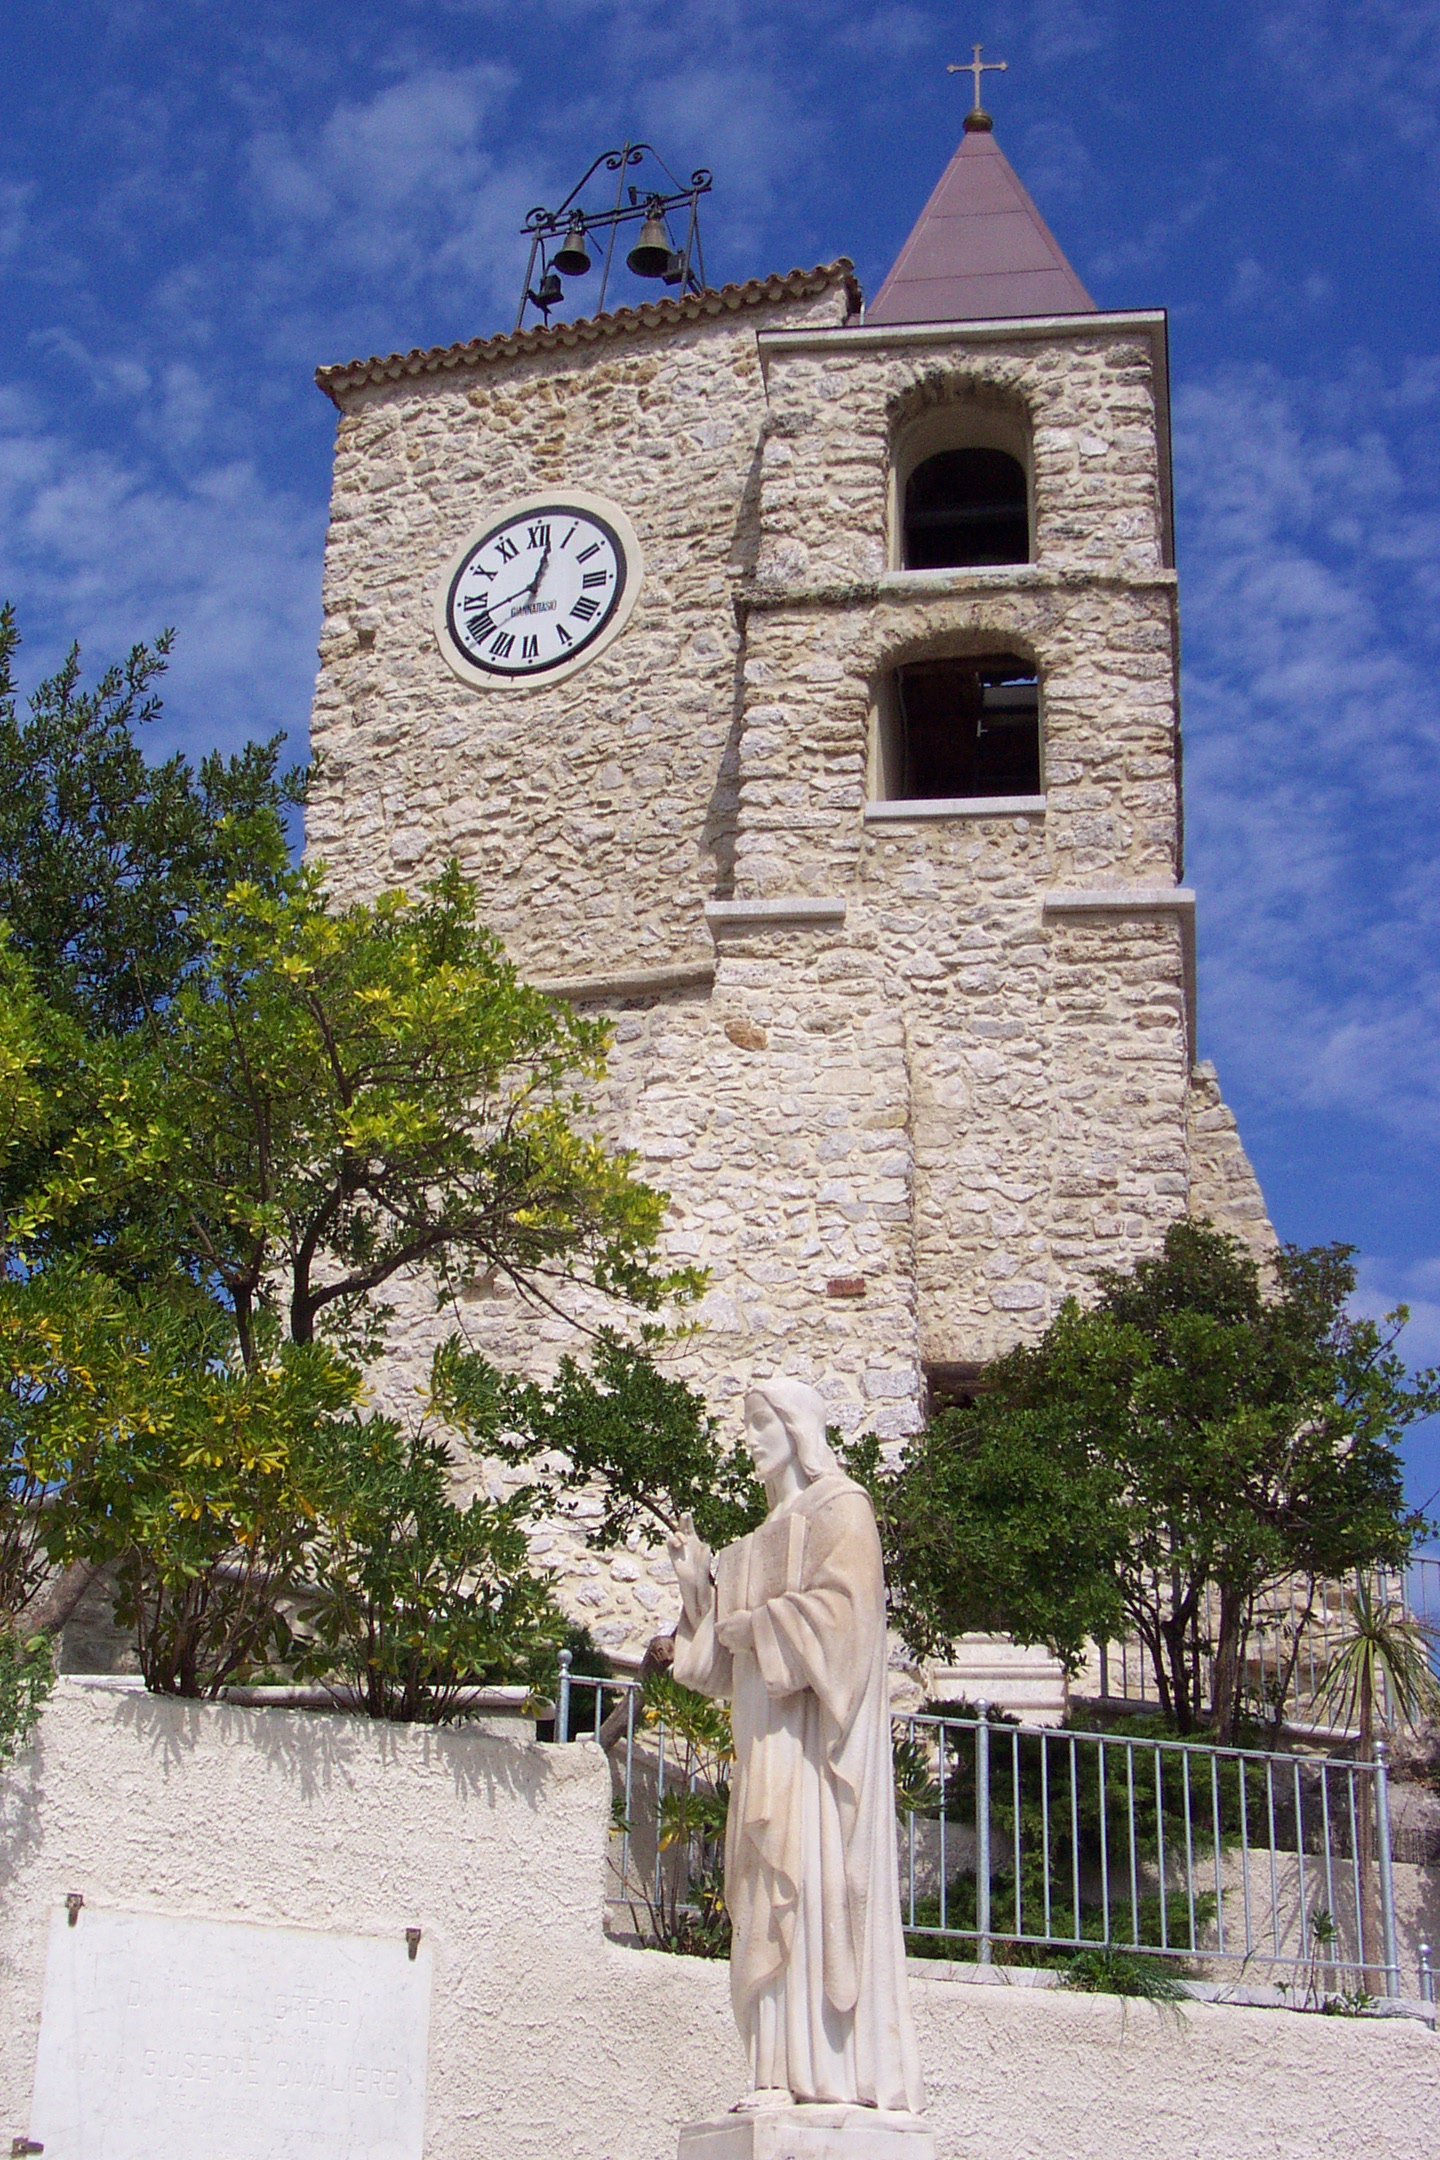 The Bell Tower and the Clock Tower.